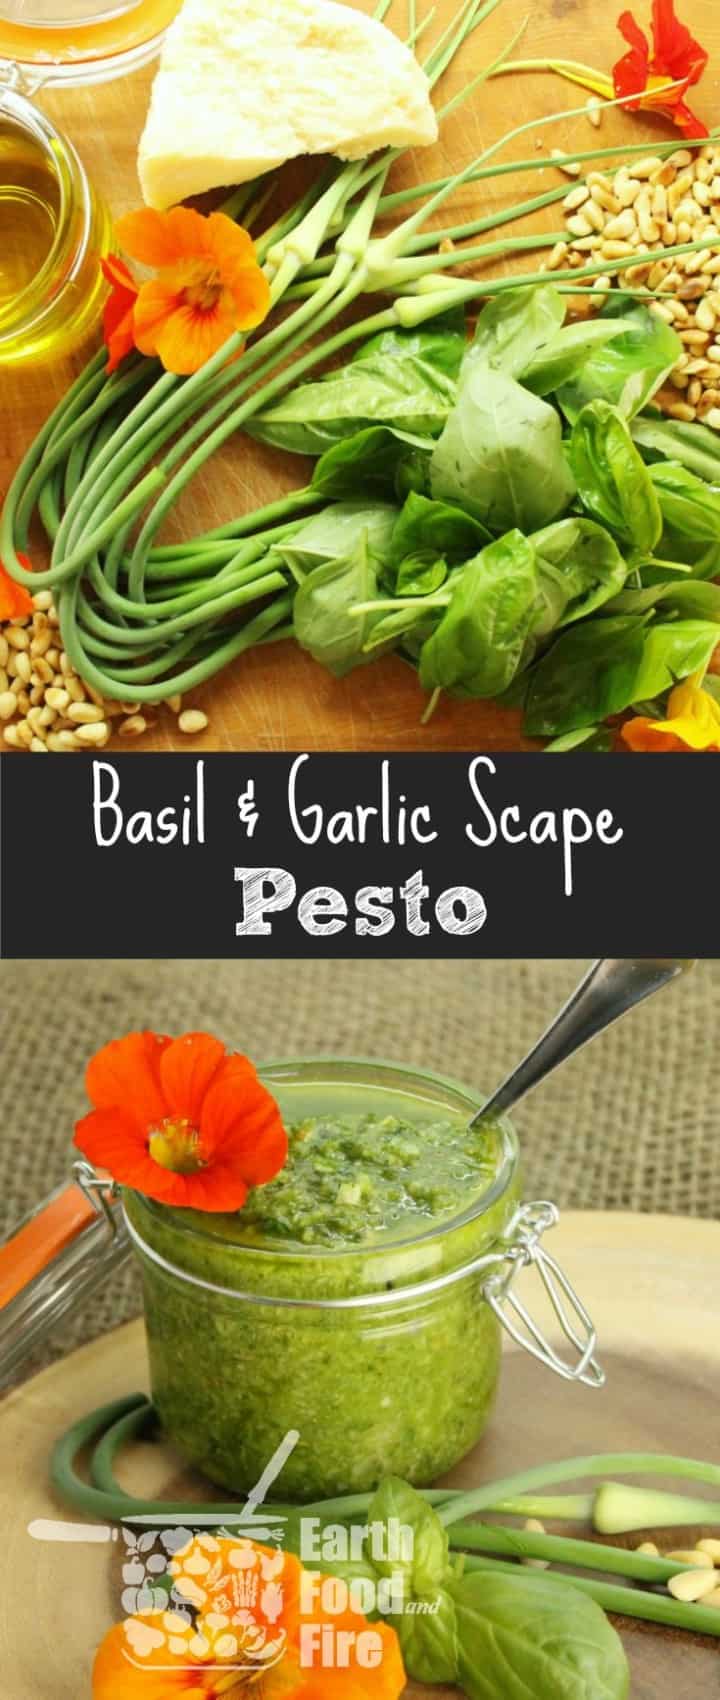 A deliciously simple to follow basil pesto recipe that uses fresh garlic scapes from the garden. Perfect for use in pasta and other dishes.